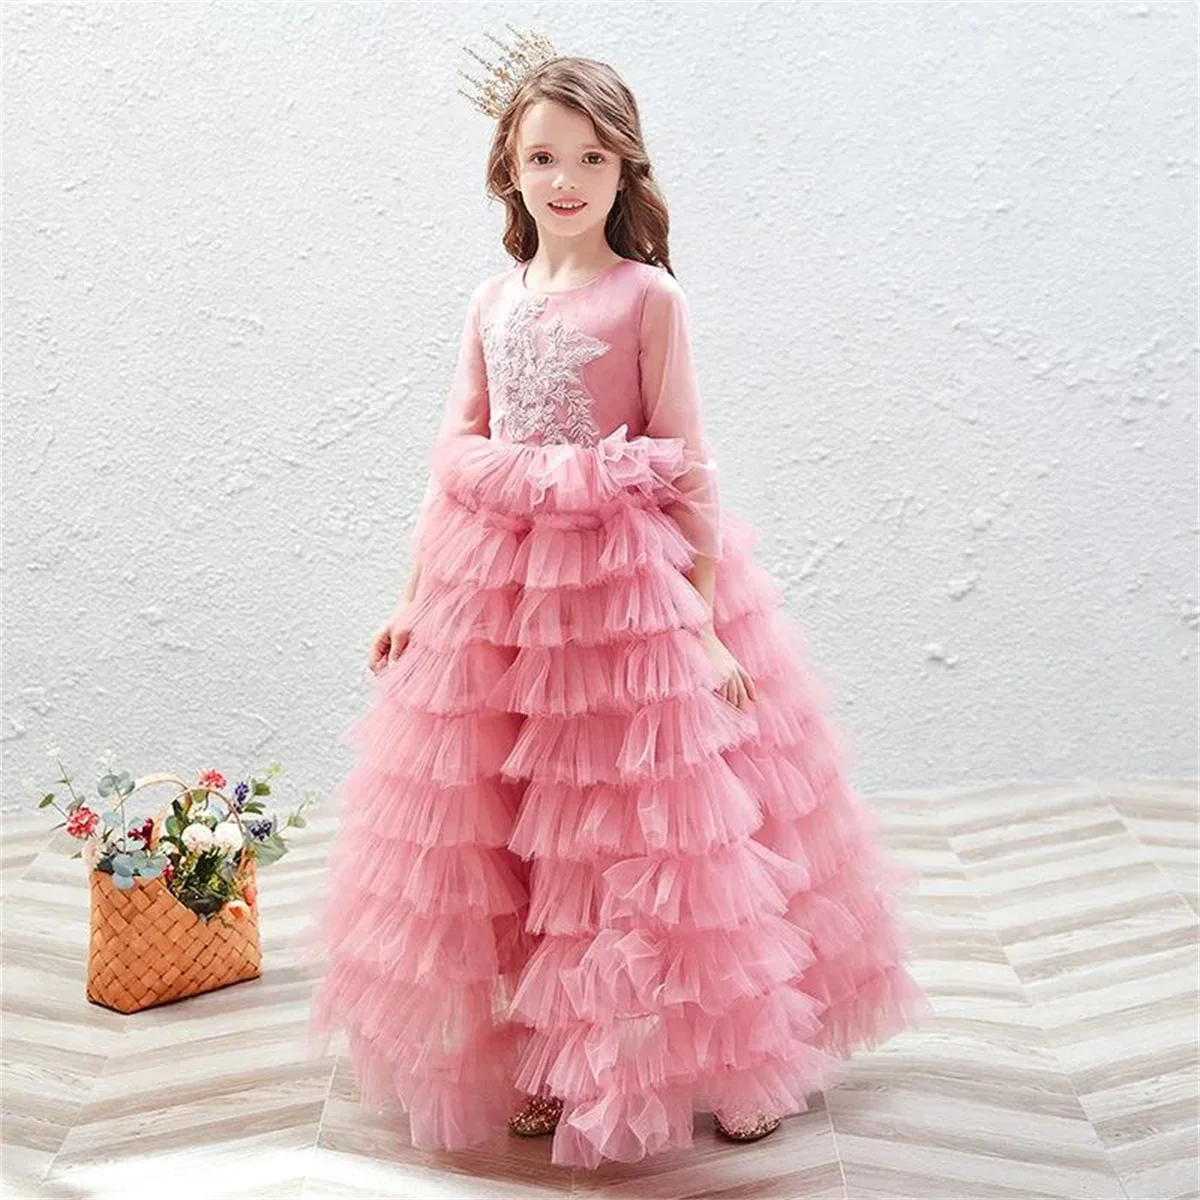 

Pink Tulle Fluffy Flower Girl Dress For Wedding Layered Applique Lace 3/4 Sleeve Child's First Eucharistic Birthday Party Dress